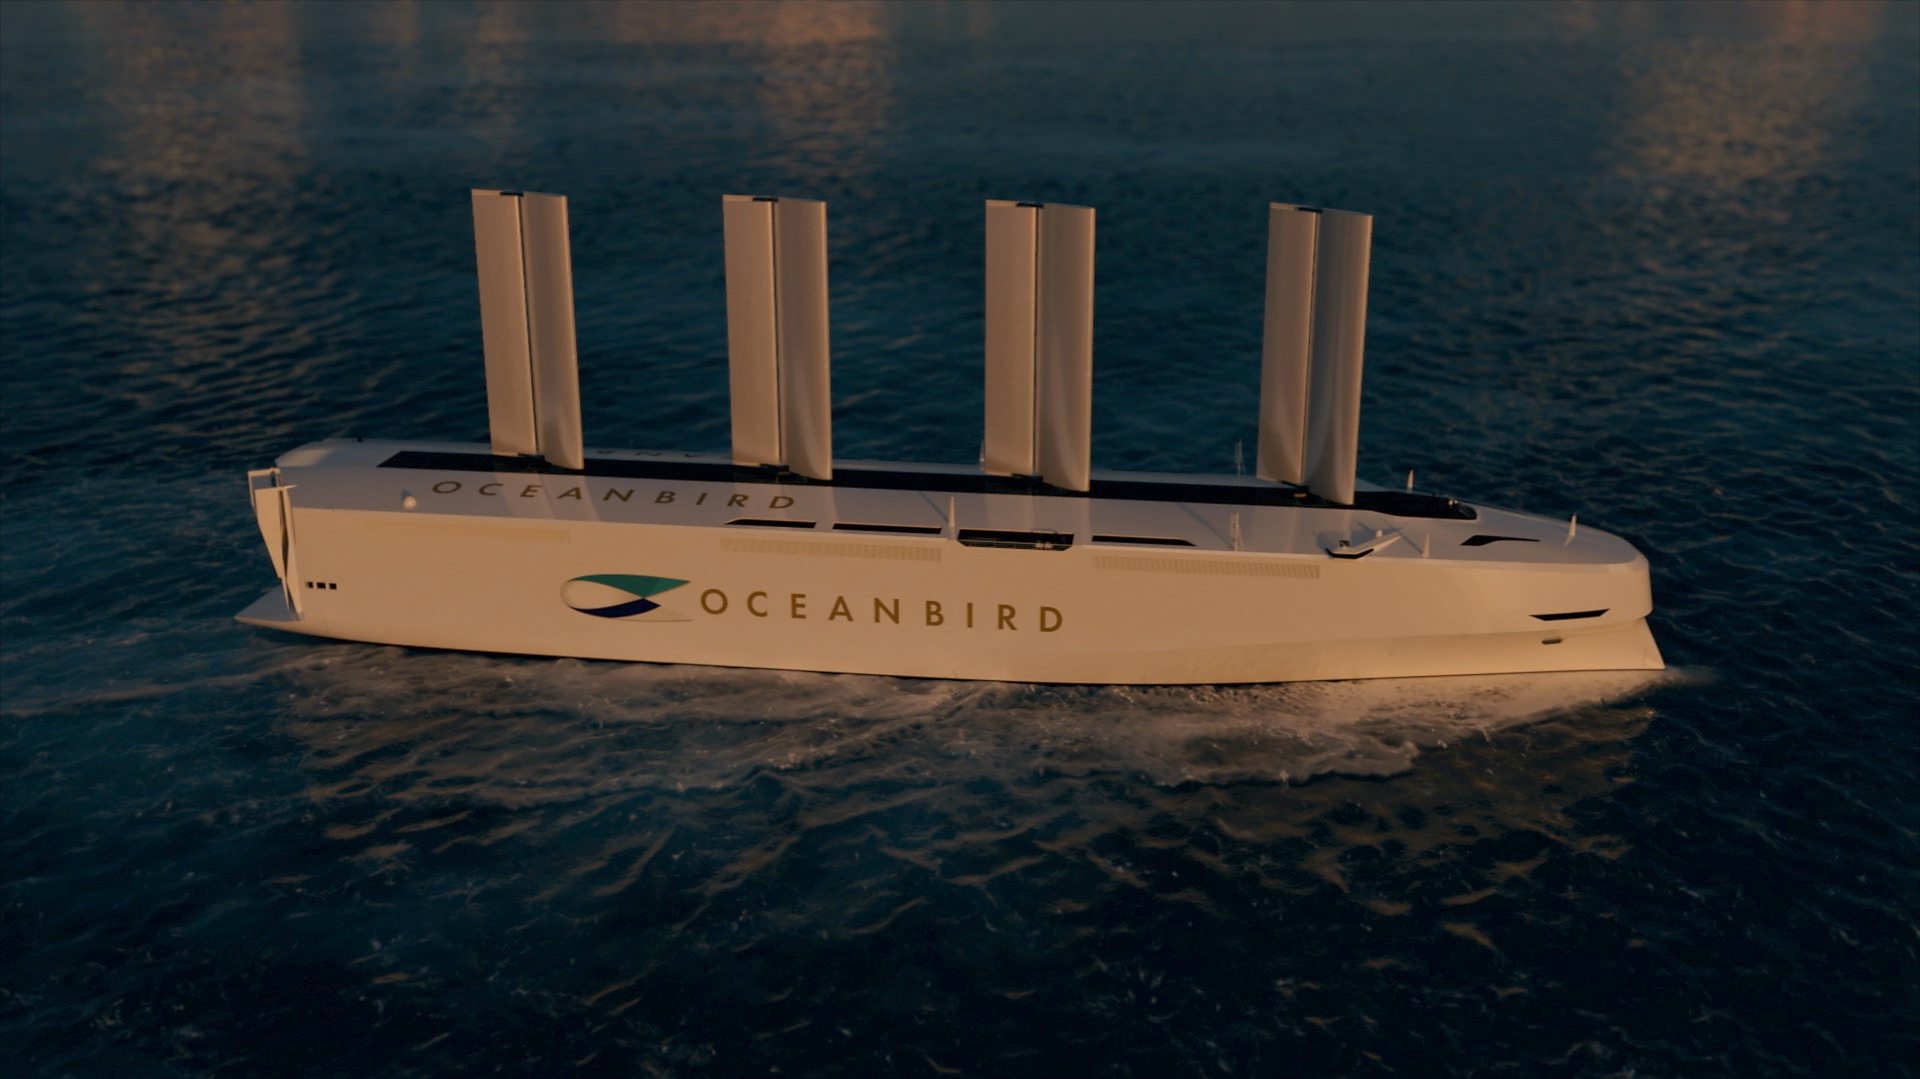 The world's largest wind-powered ship